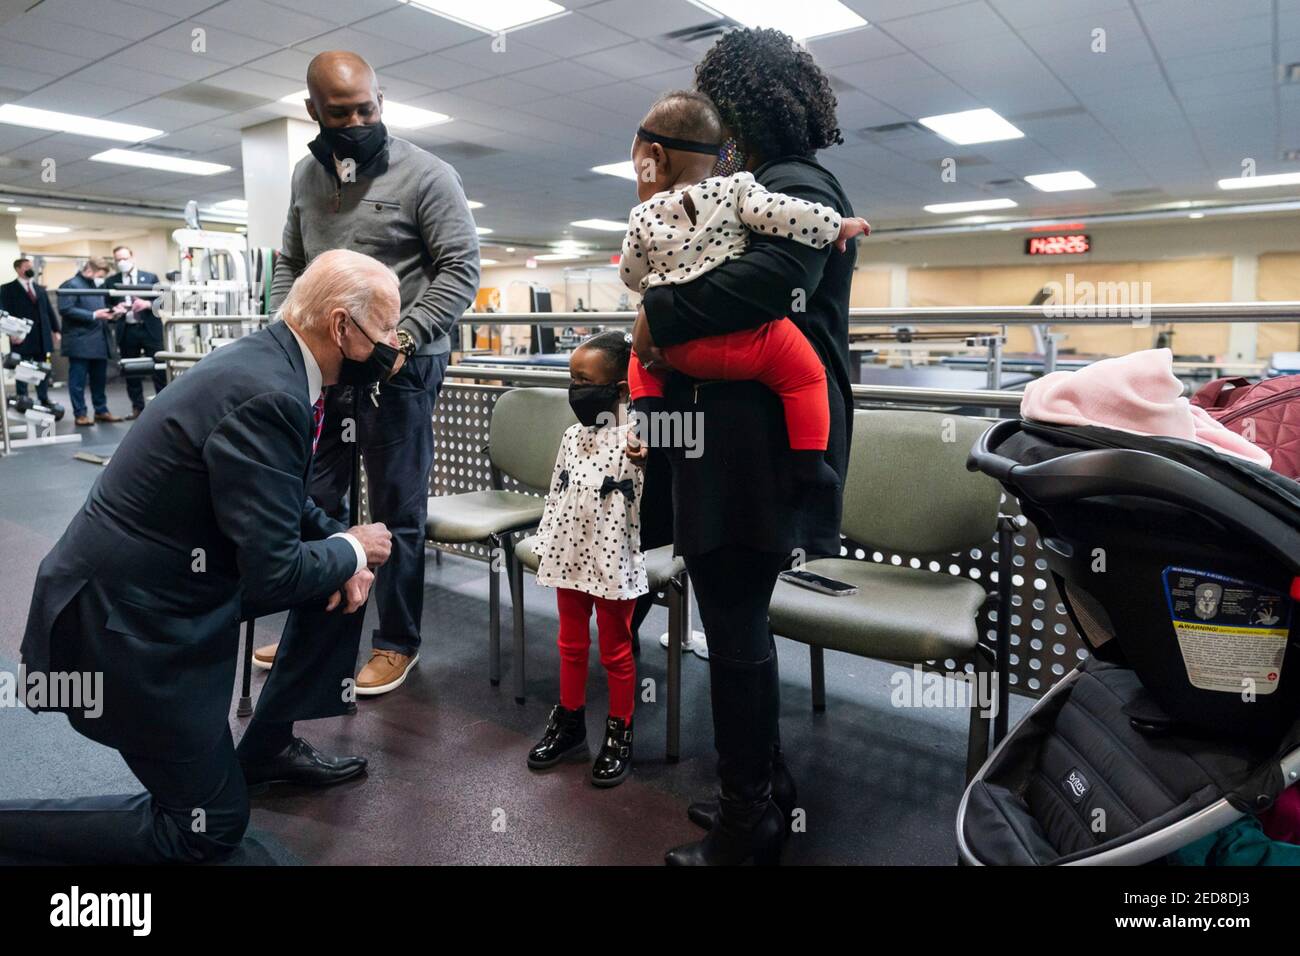 U.S President Joe Biden greets Ret. U.S. Army Sgt. Peter Francis, his wife Carren, and their daughters Morgan and Kamryn during a visit to Walter Reed National Military Medical Center January 29, 2021 in Bethesda, Maryland. Sgt. Francis was injured in May of 2013 while deployed to Afghanistan where he suffered a gunshot wound to his spine with residual nerve damage to his right leg. Stock Photo